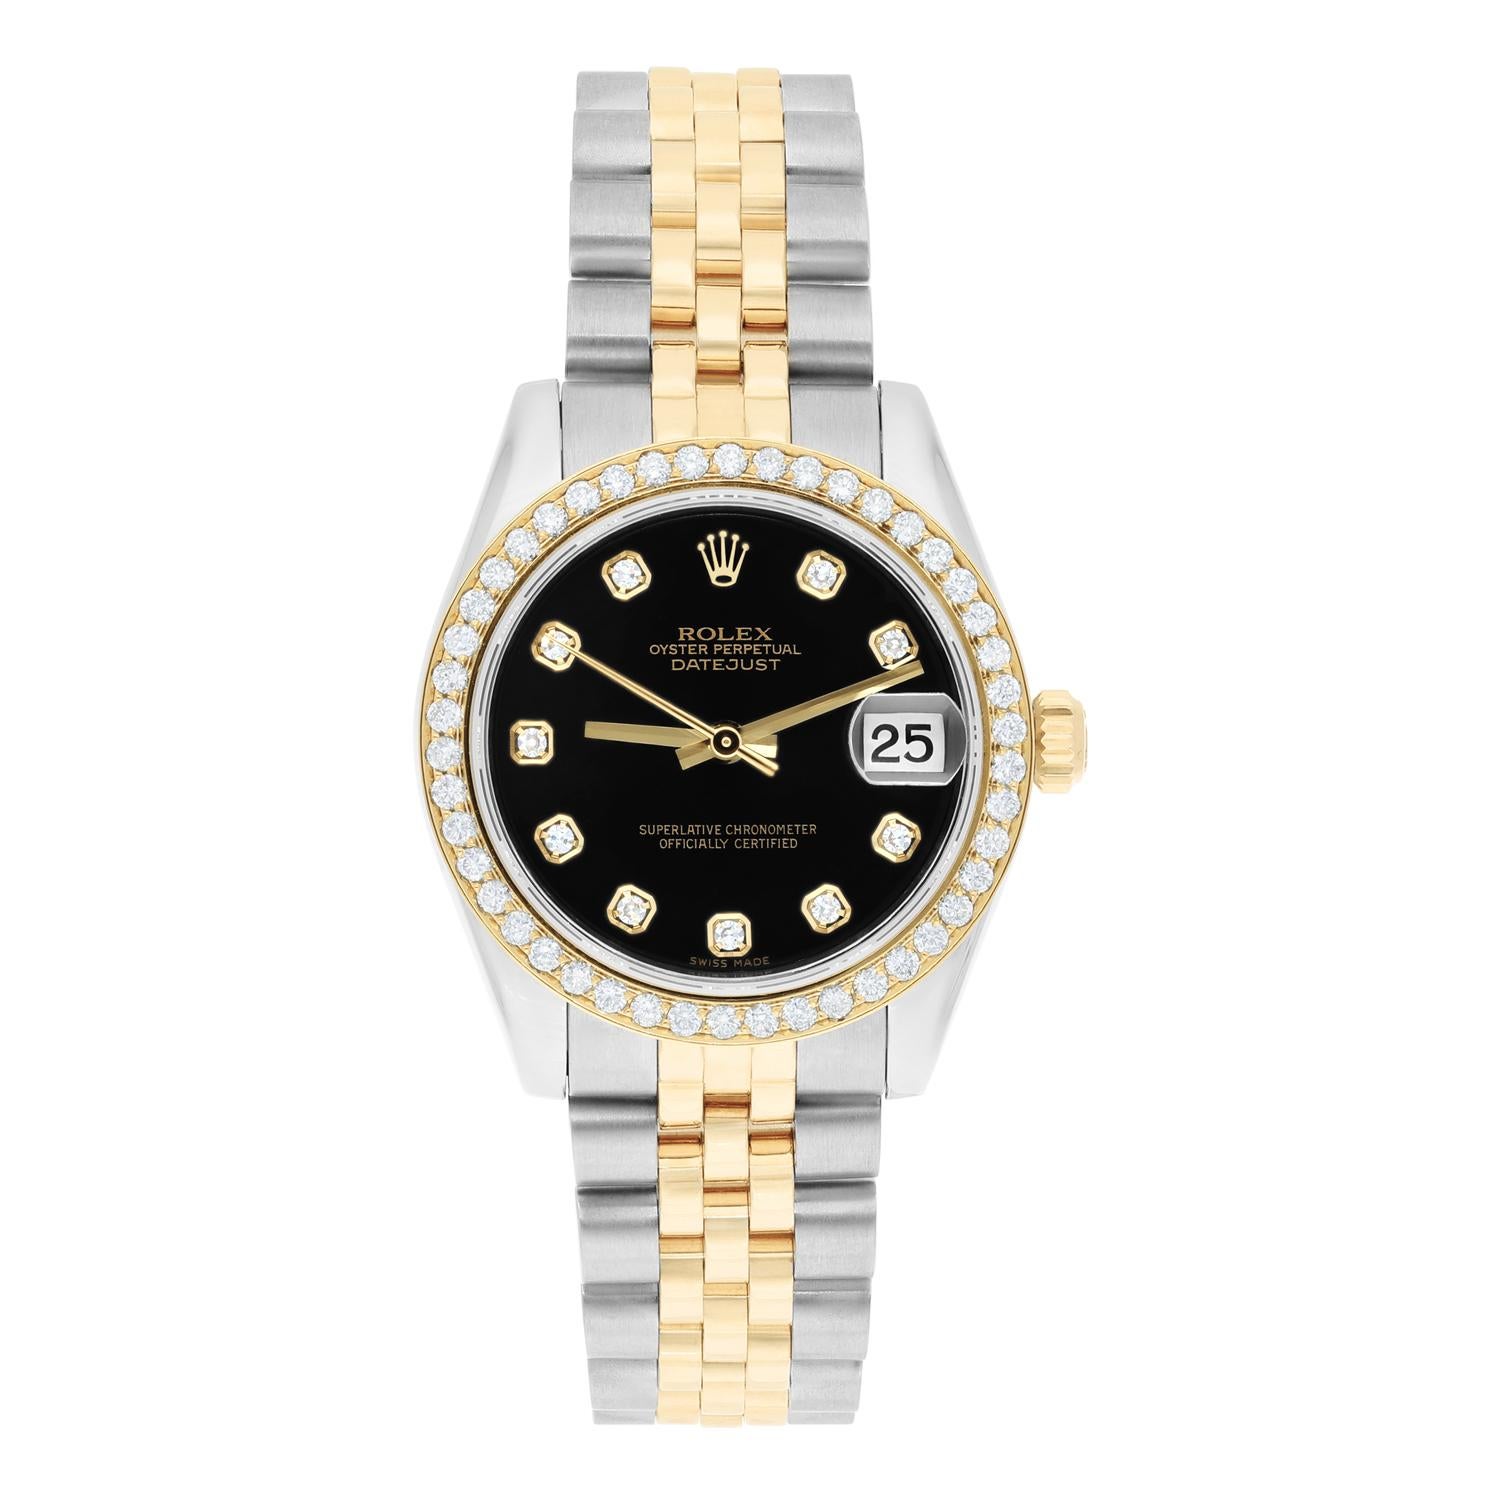 This stunning Rolex Datejust watch is a true luxury piece for any woman. The watch features a beautiful two-tone yellow and silver jubilee band with a folding buckle, a 31mm case size, factory black diamond dial and custom 18K gold plated diamond